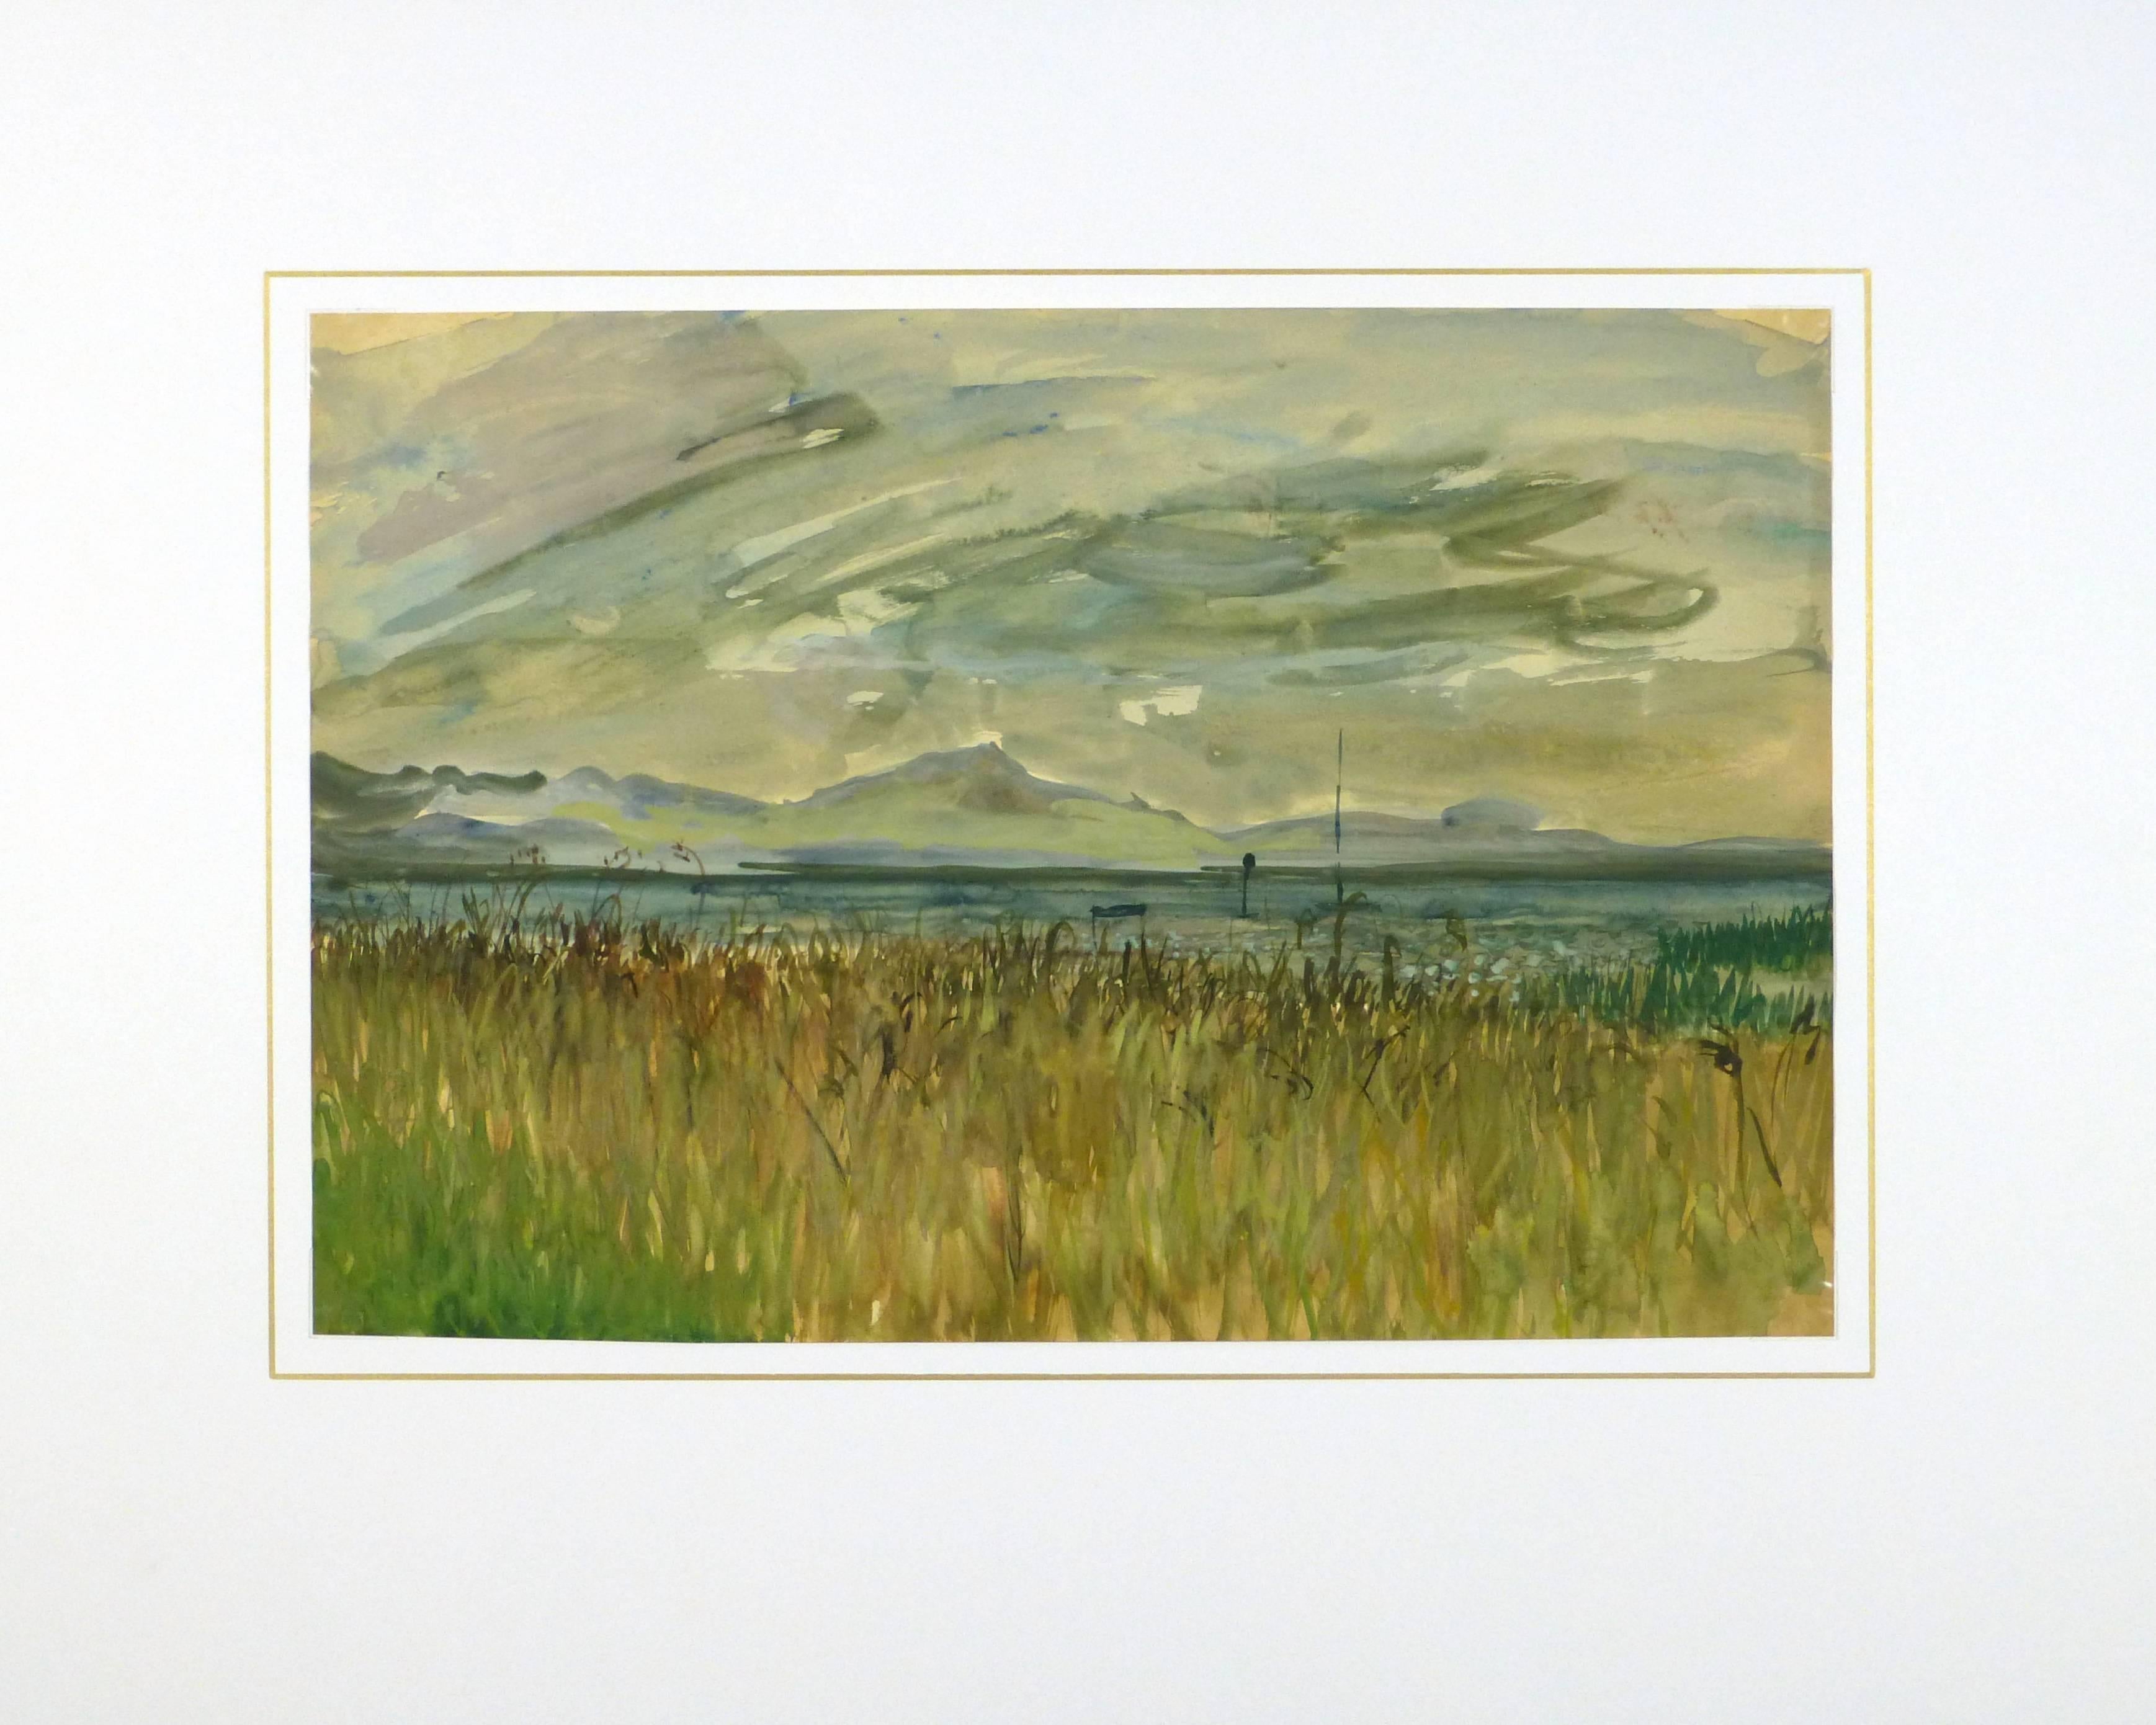 Superb watercolor seascape of a beach lush with grass under a beautiful darkening sky by French artist Stephane Magnard (1917-2003), circa 1950. 

Original one-of-a-kind artwork on paper displayed on a white mat with a gold border. Mat fits a